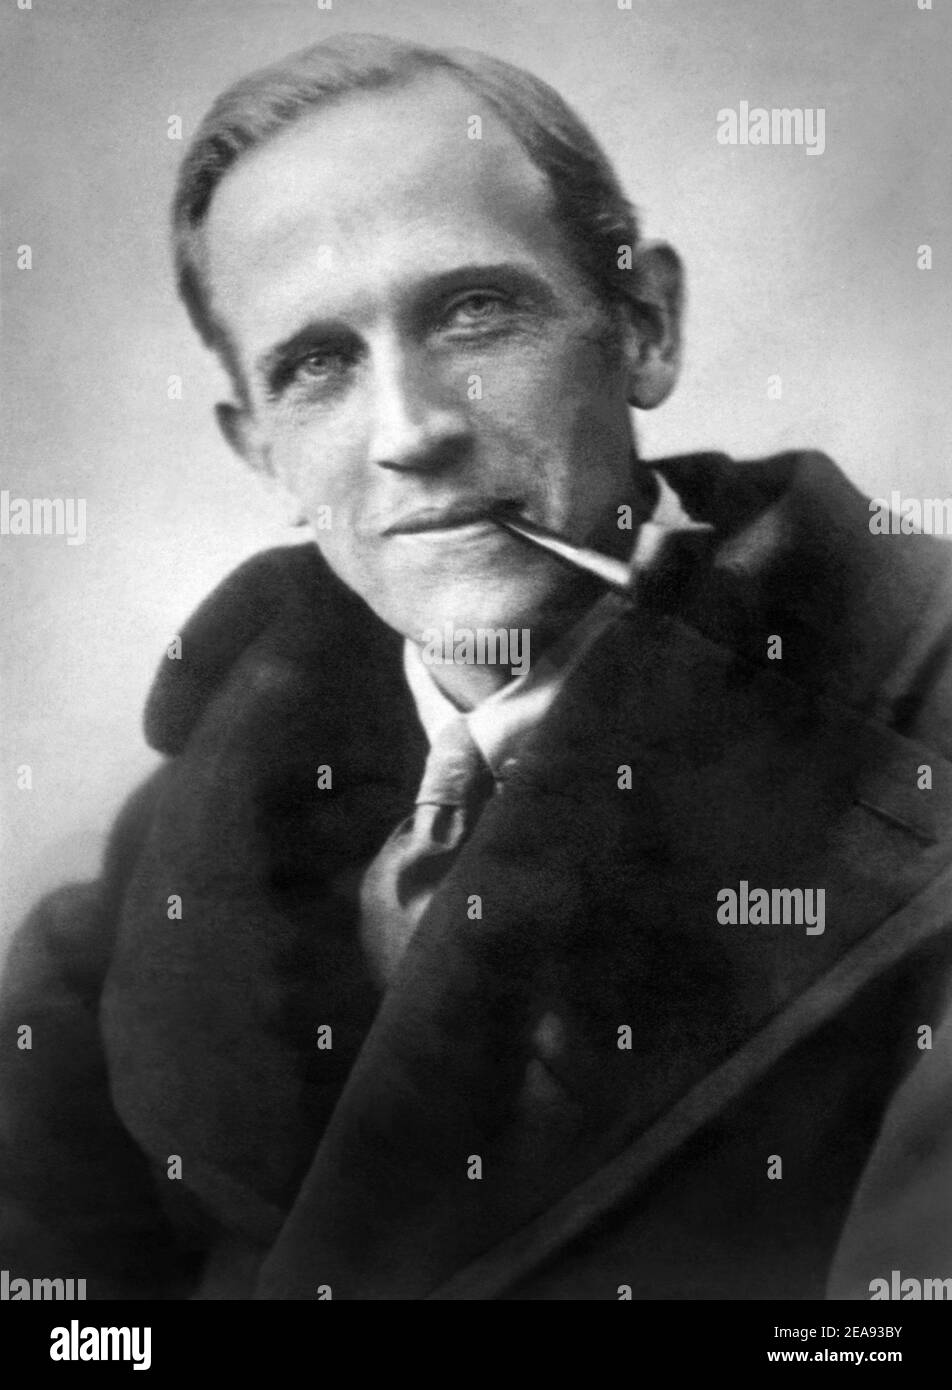 A.A. (Alan Alexander) Milne (1882–1956), English author, poet, and playwright, best known for his books about the teddy bear Winnie-the-Pooh and for various poems, in a portrait from 1926. Stock Photo